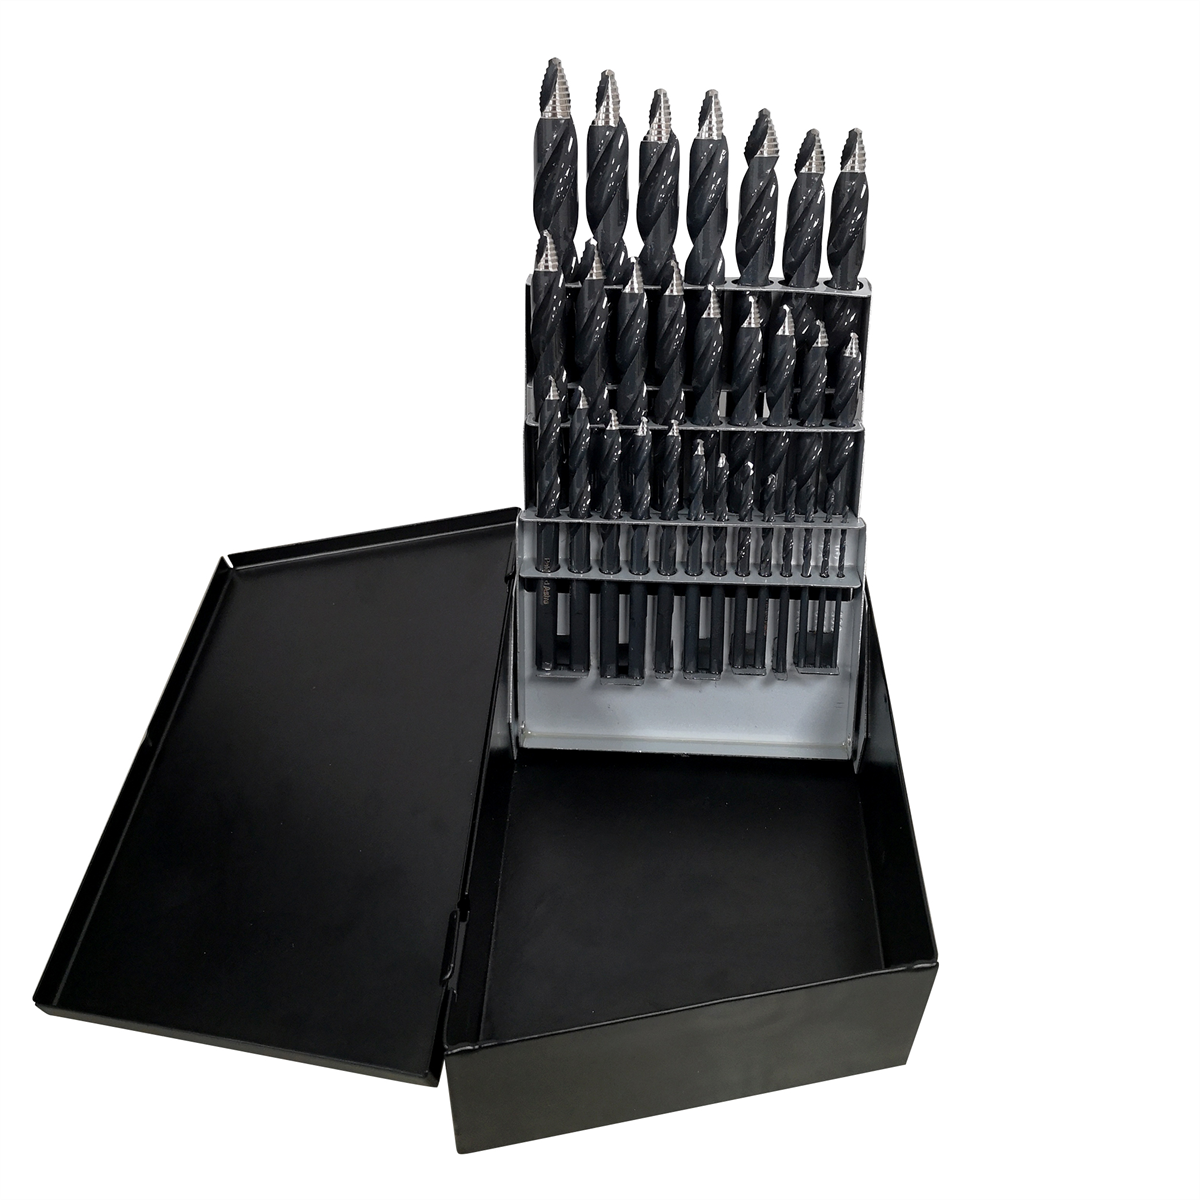 Picture of Astro ASTTS29 0.375 in. Onyx Turbo Step High-Speed Steel Mechanics Length Drill Bits, Black Oxide - 29 Piece